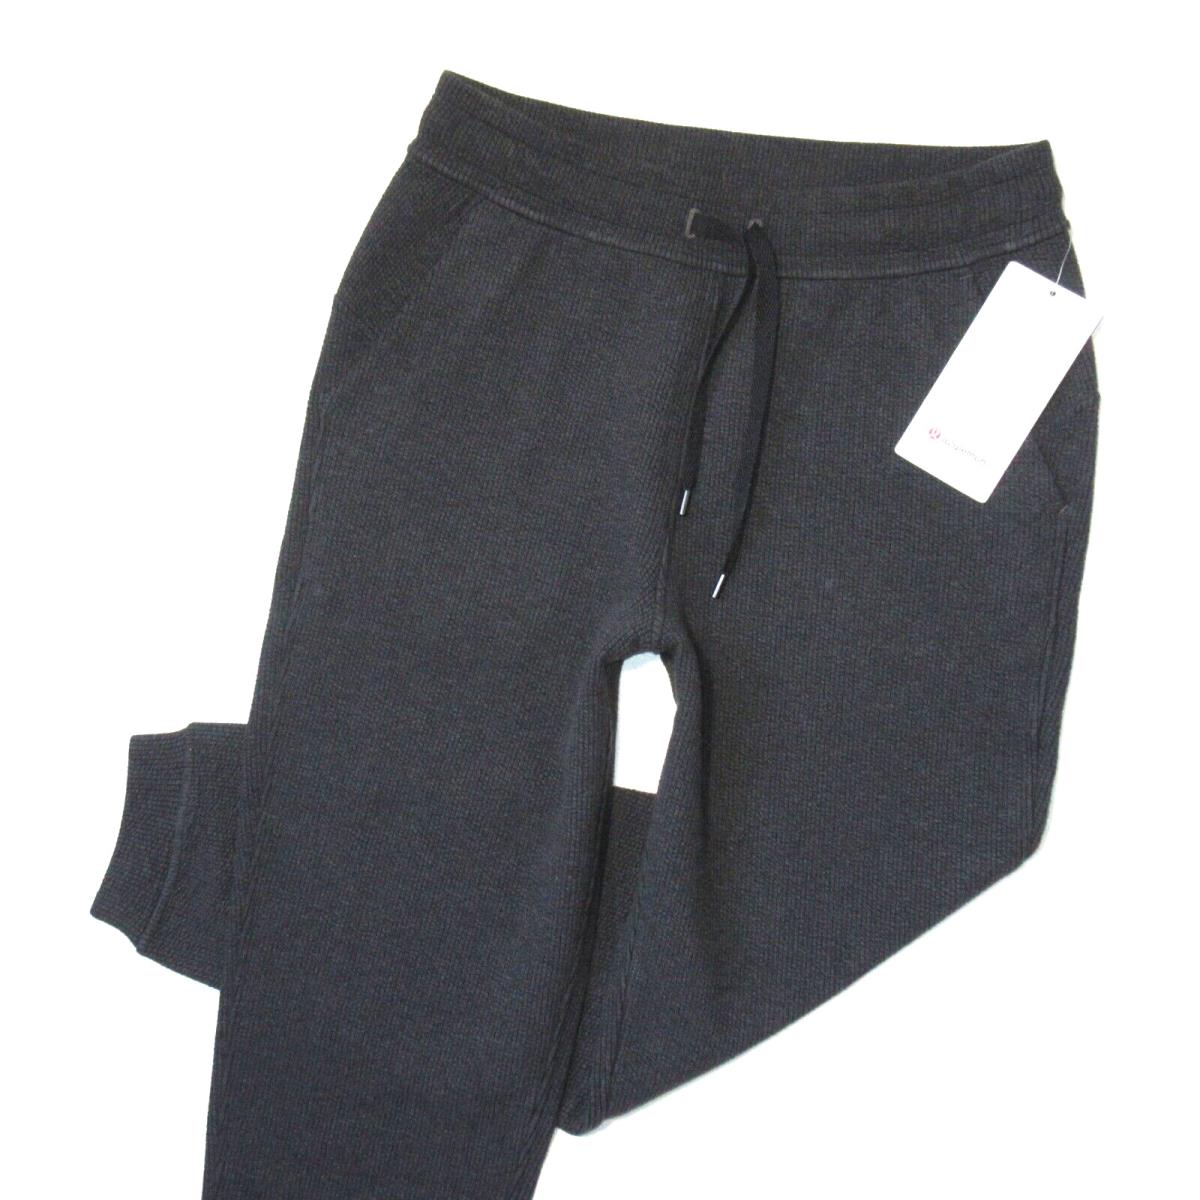 Lululemon Ribbed High-rise 7/8 Jogger in Heathered Black Textured Pant 8